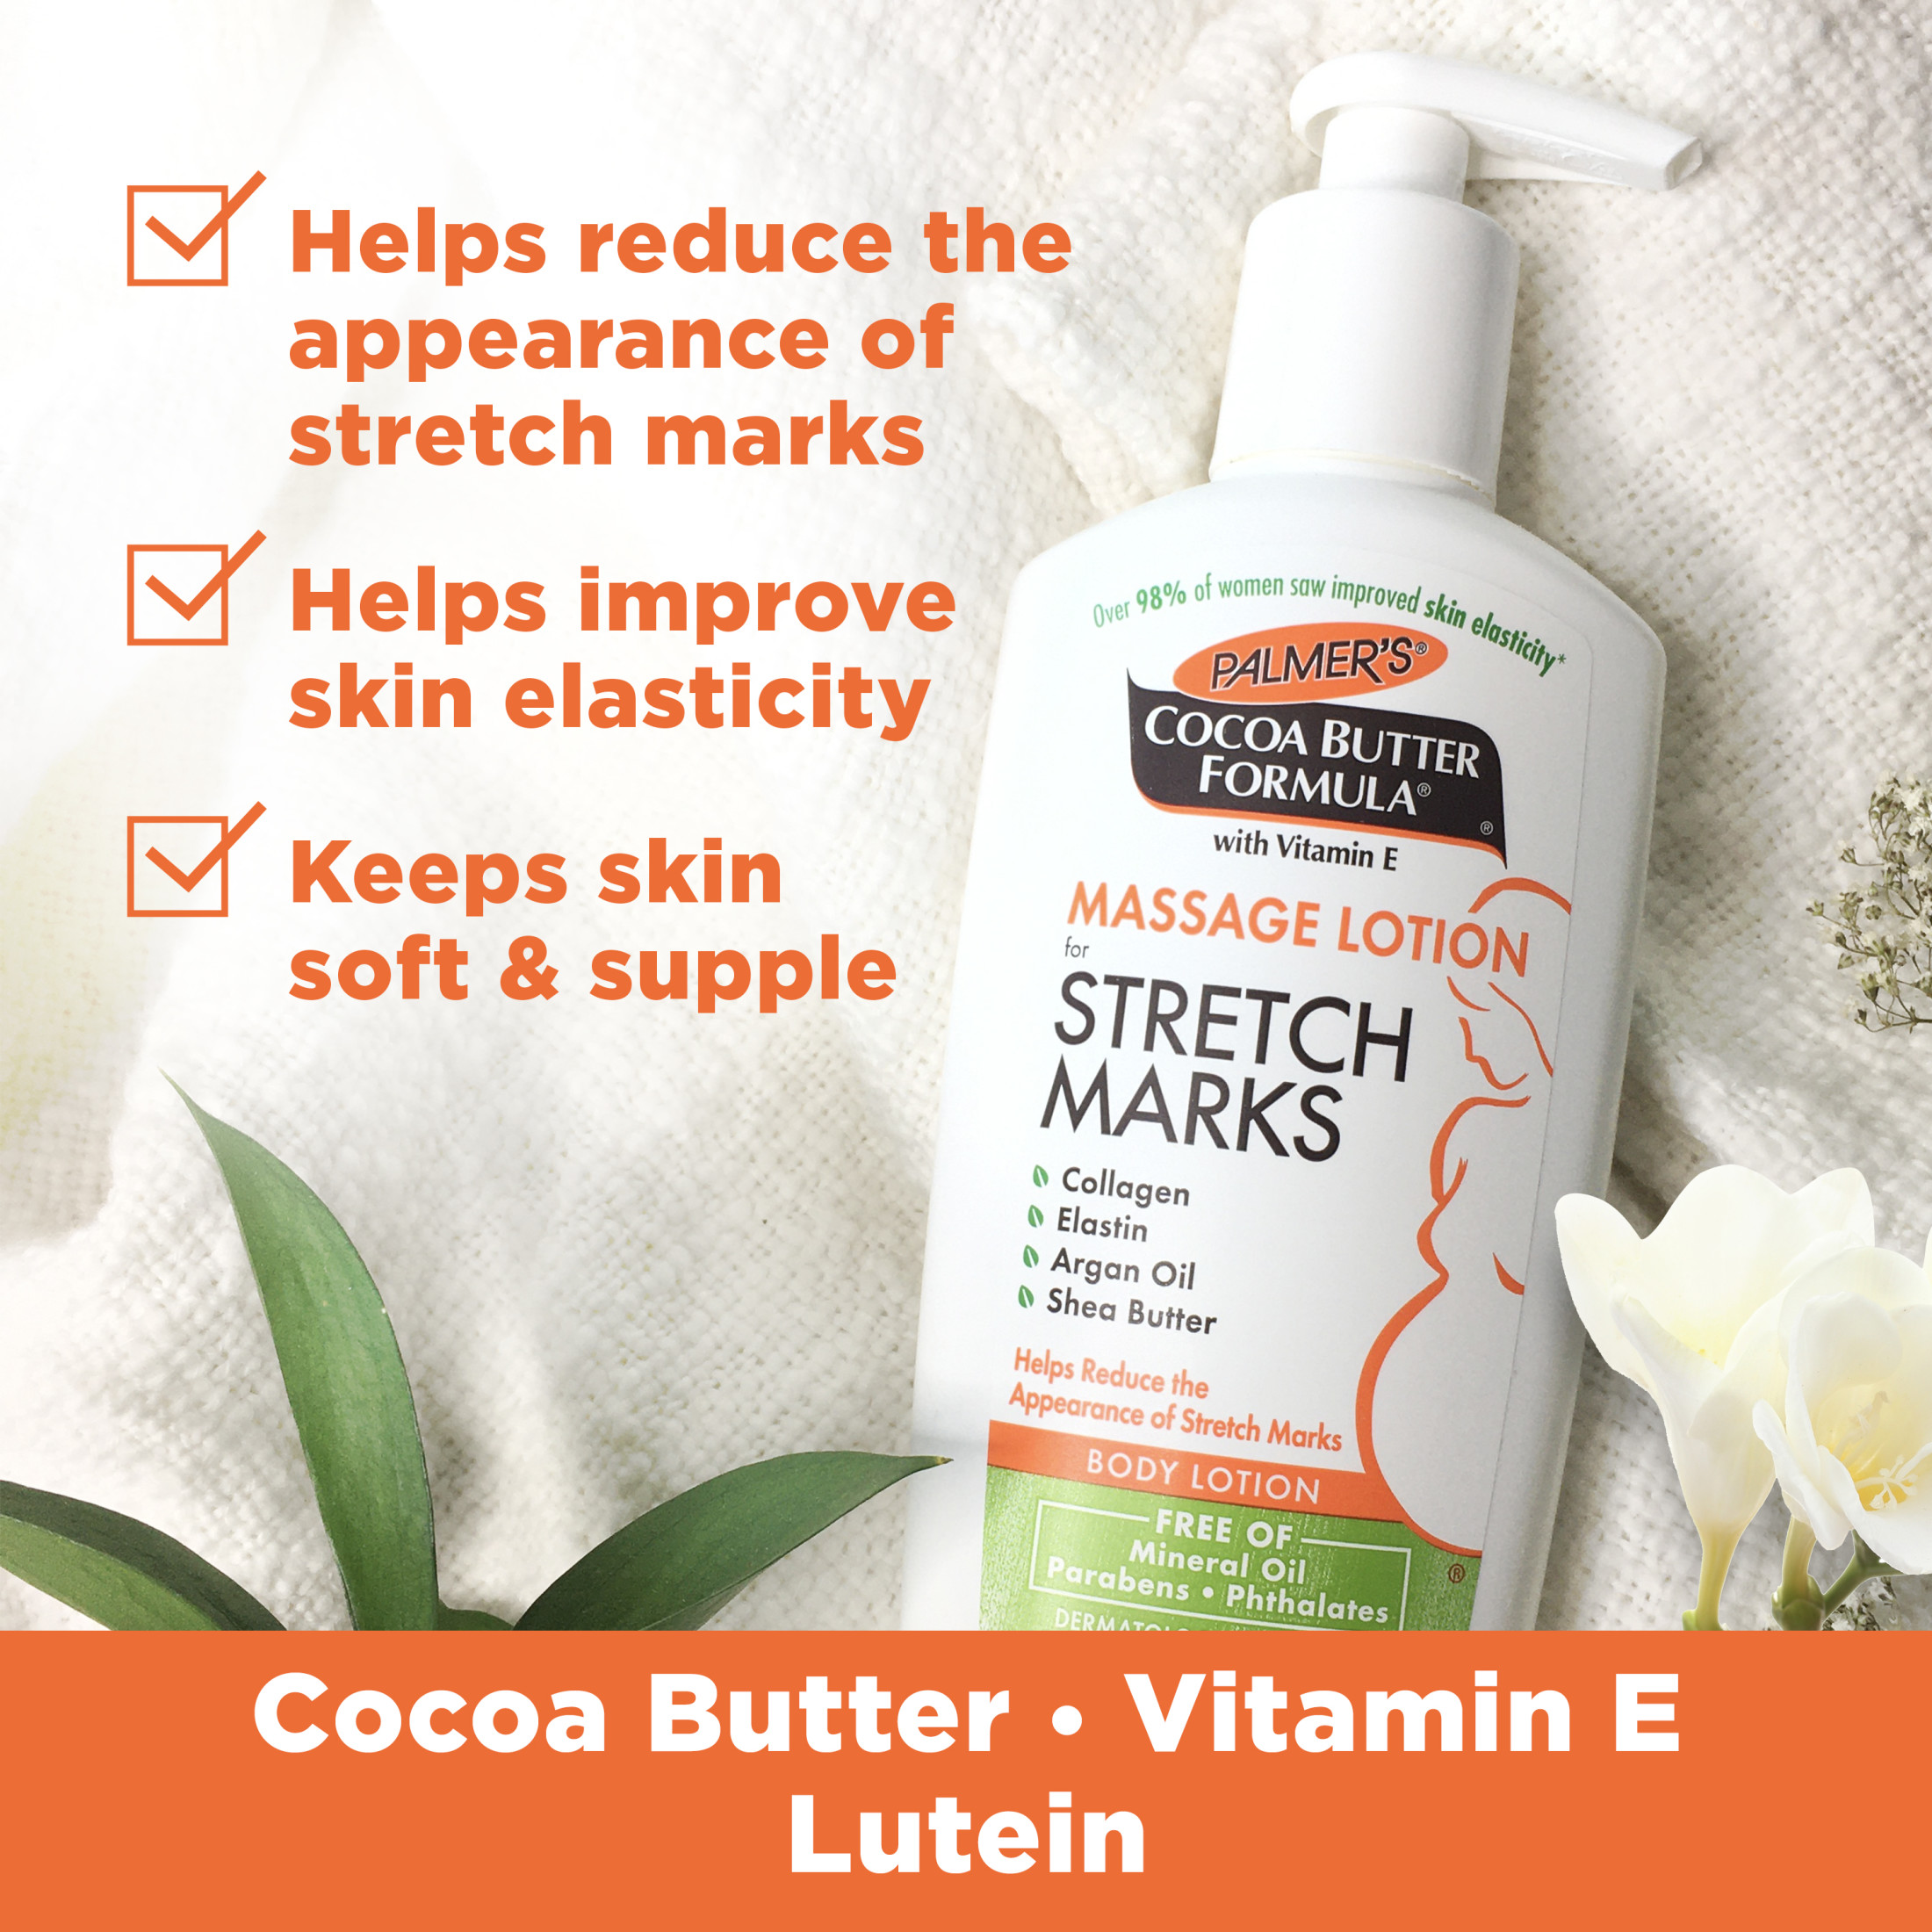 Palmer's Cocoa Butter Formula Massage Lotion for Stretch Marks, 8.5 fl. oz. - image 4 of 16